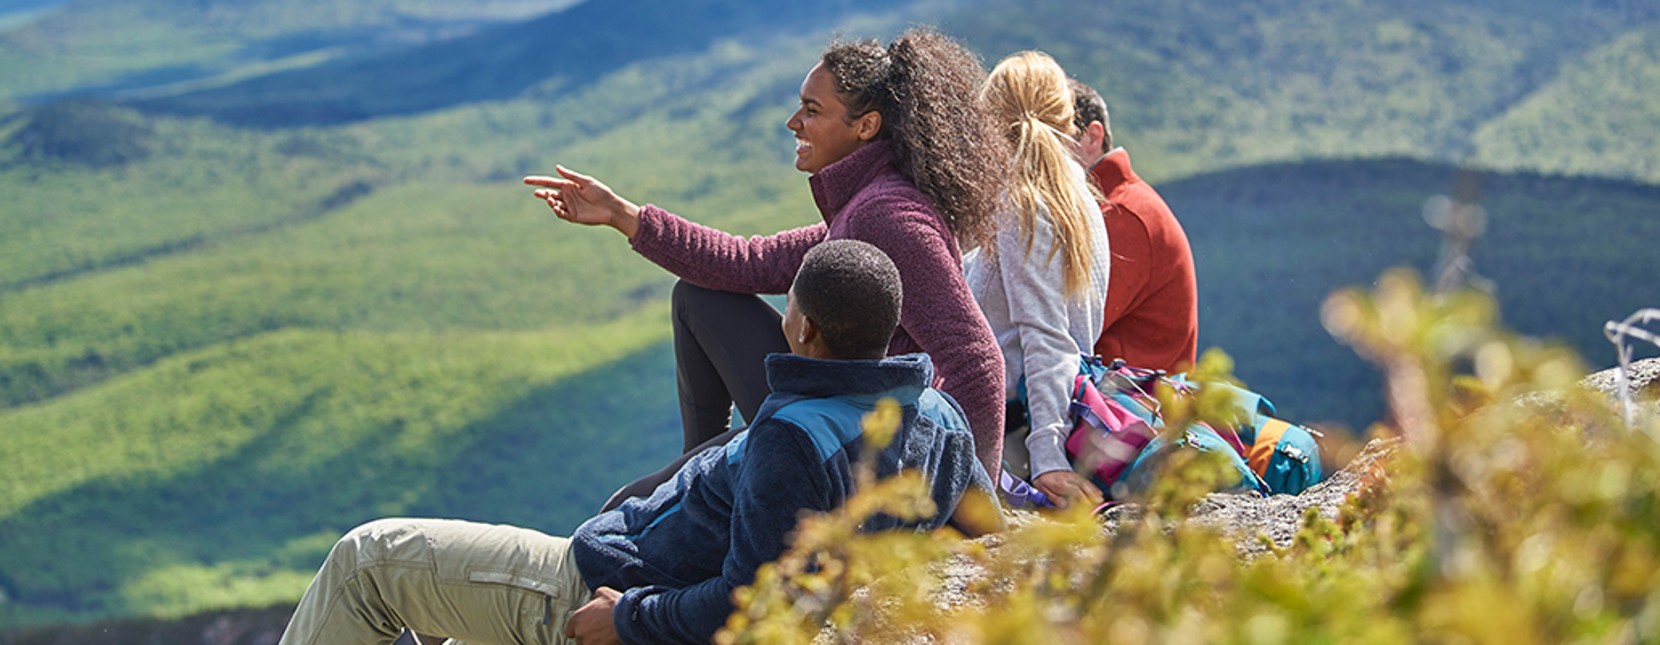 Group of people sitting, looking out over a mountain landscape.